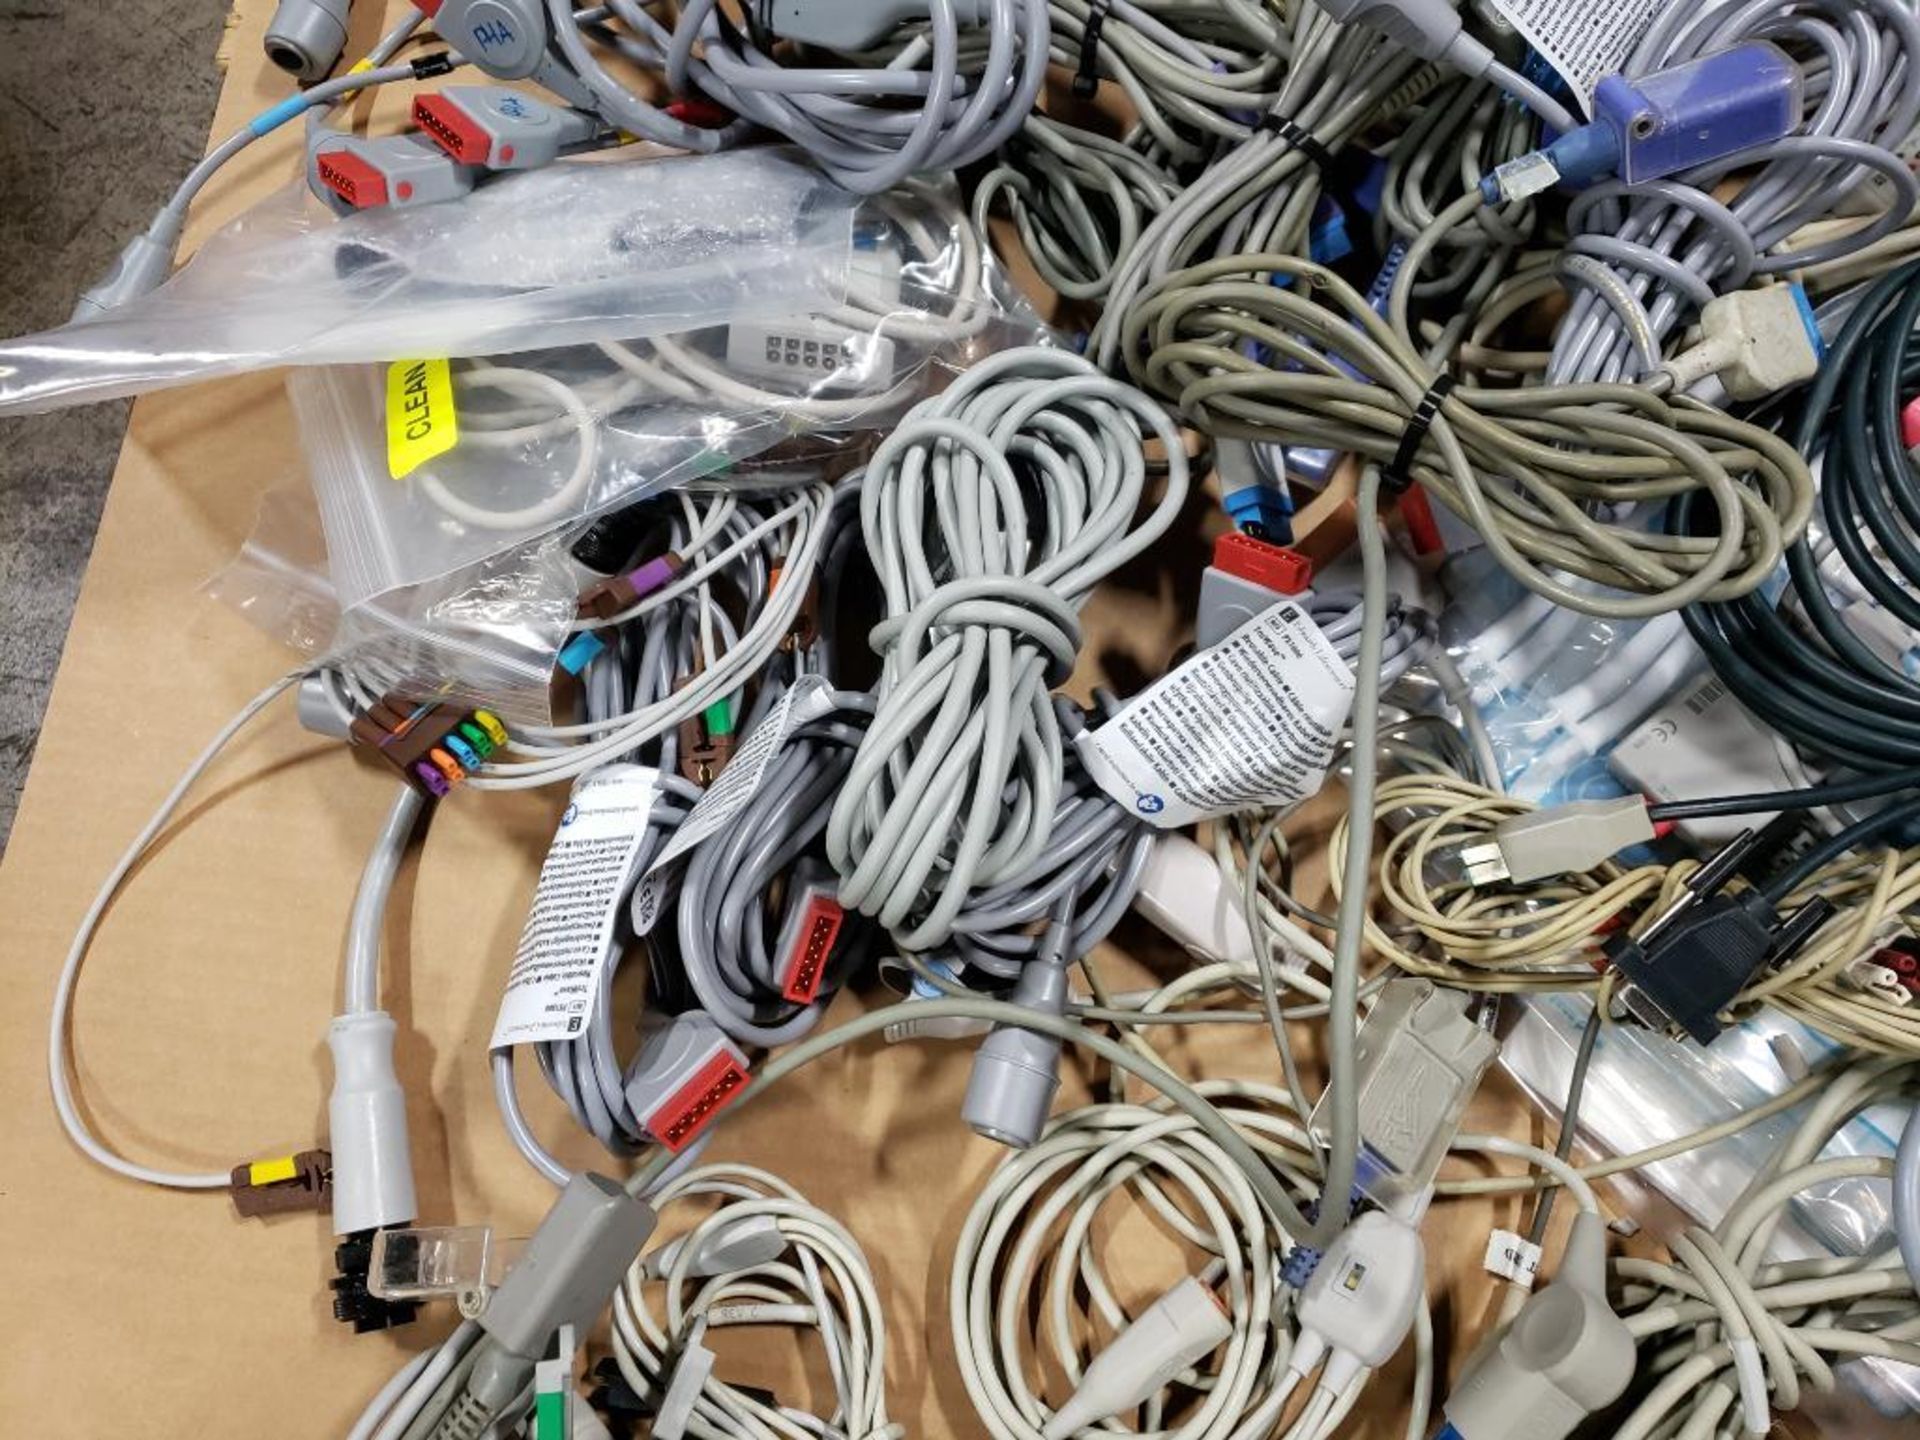 Large assortment of cords and cables. - Image 7 of 11